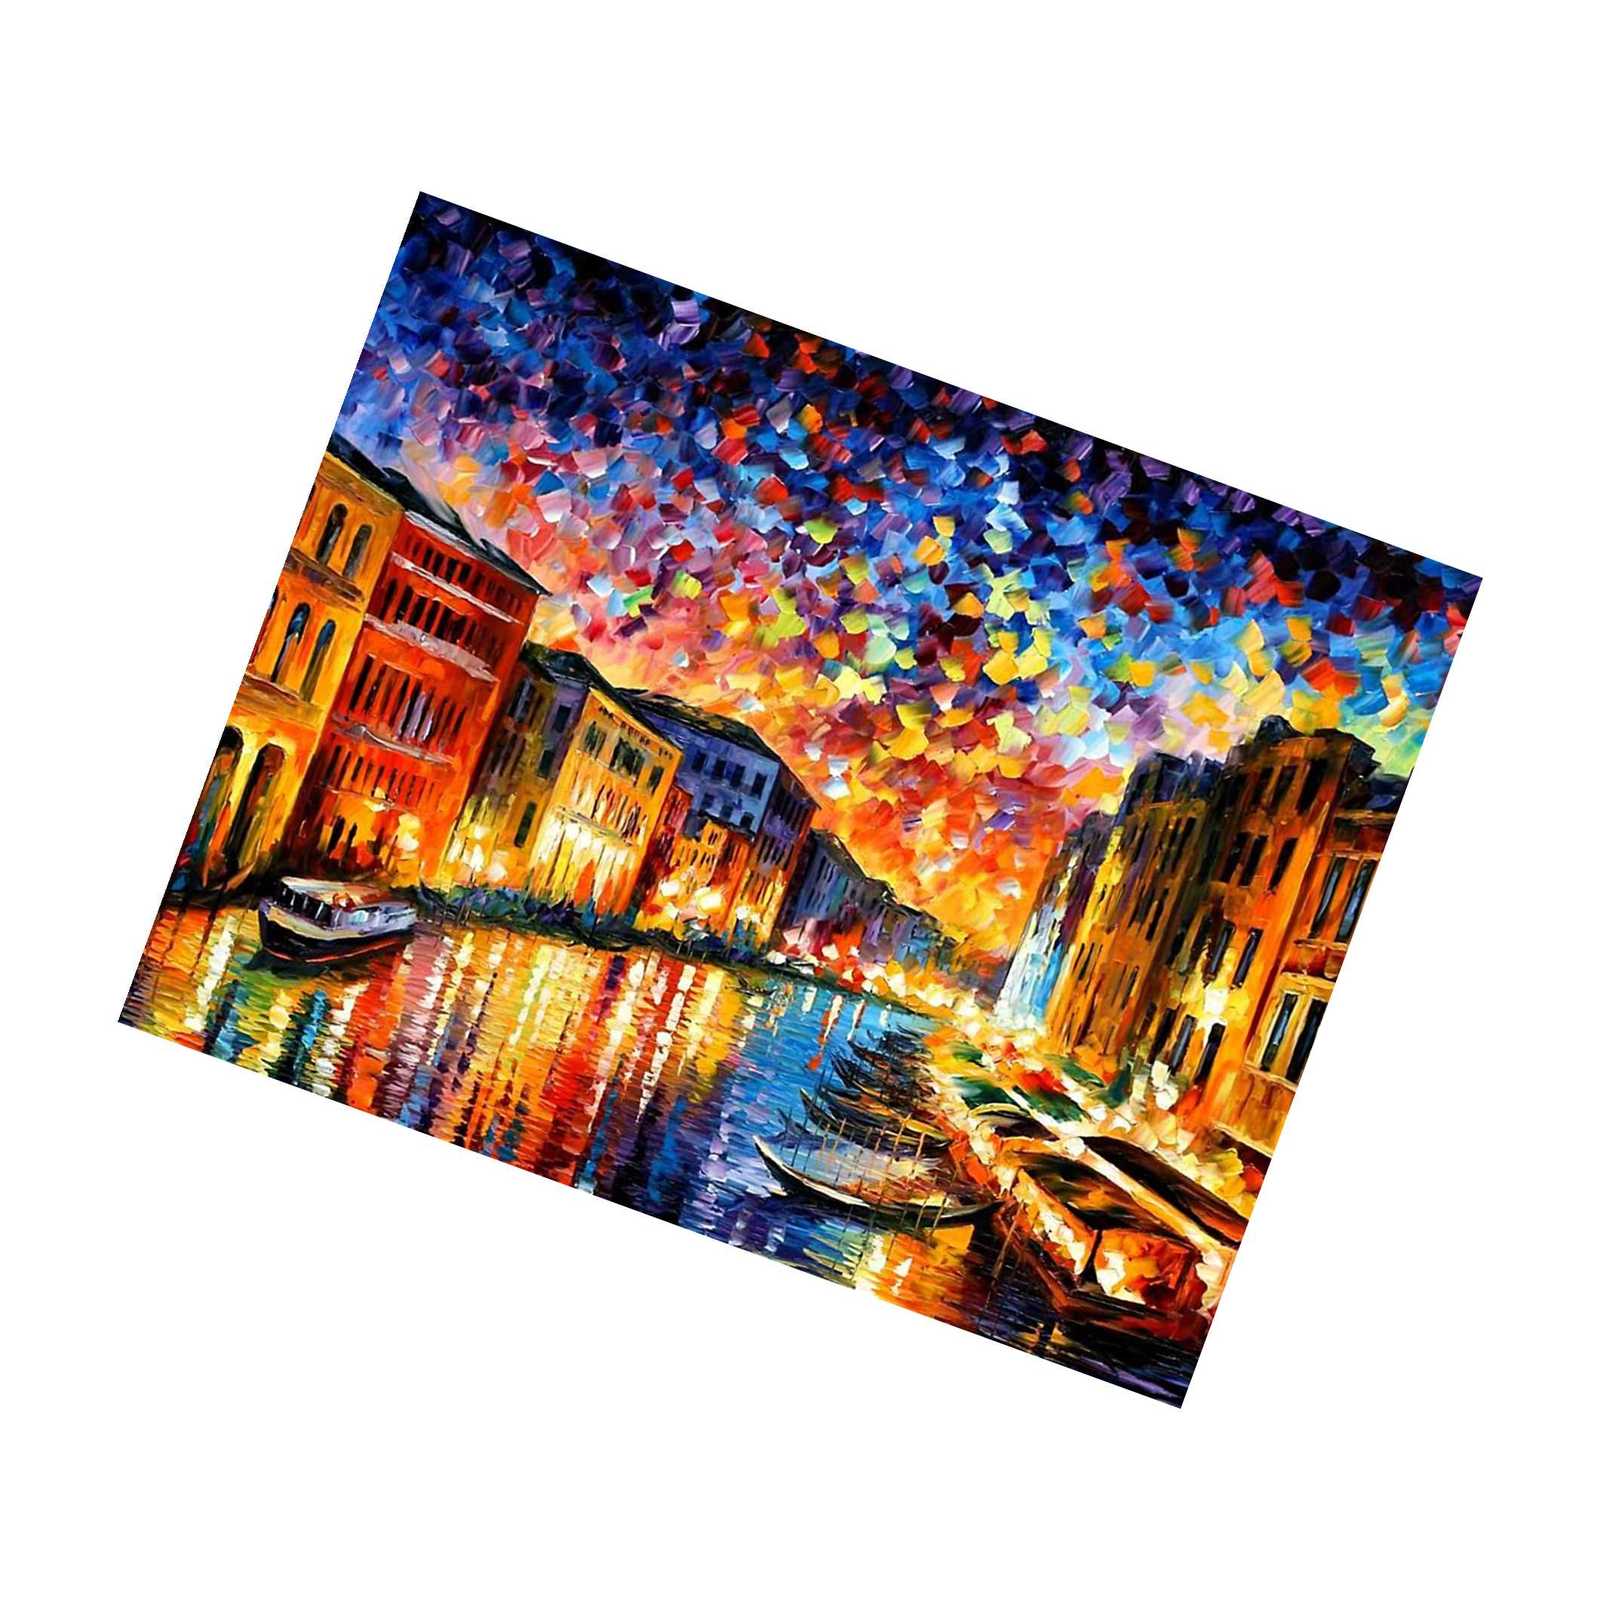 Venice Water City Diy 5D Painting Kits For Adults Kids Wall Hanging Painting